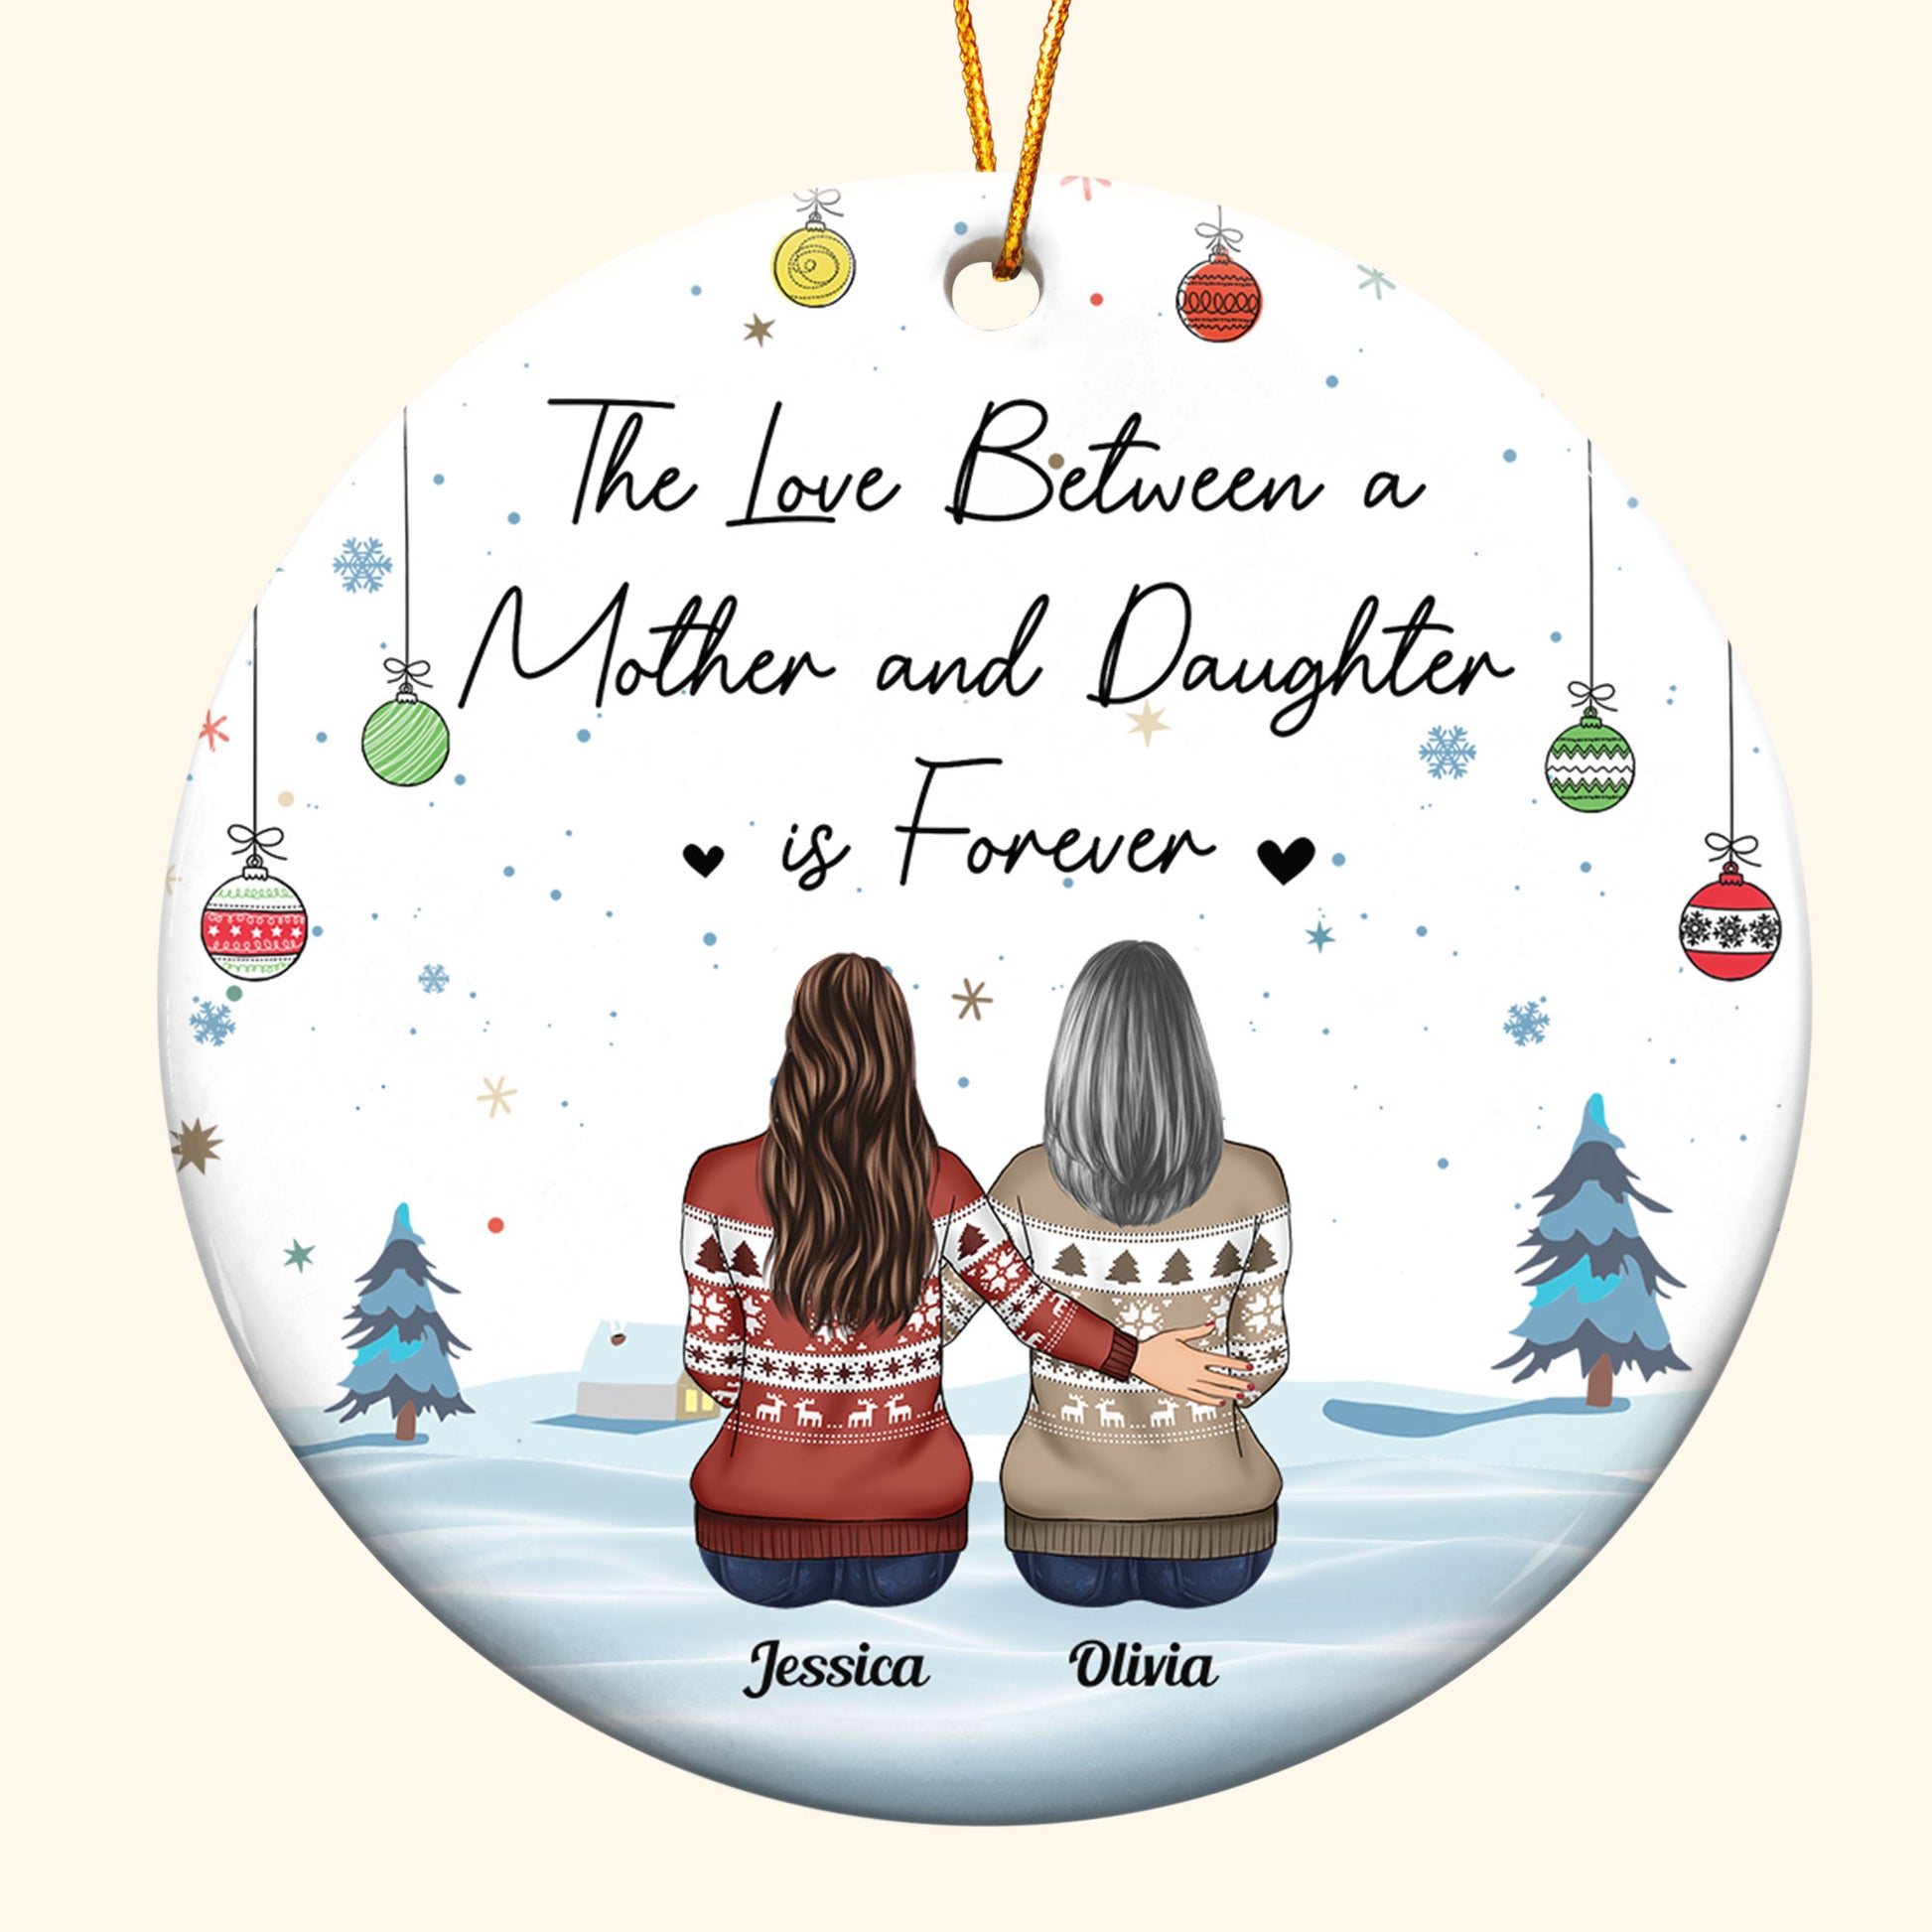 The Love Between A Mother And Daughter Is Forever - Personalized Ceramic Ornament - Christmas, Loving Gift For Mother, Mom, Nana, Daughters, Son, Children